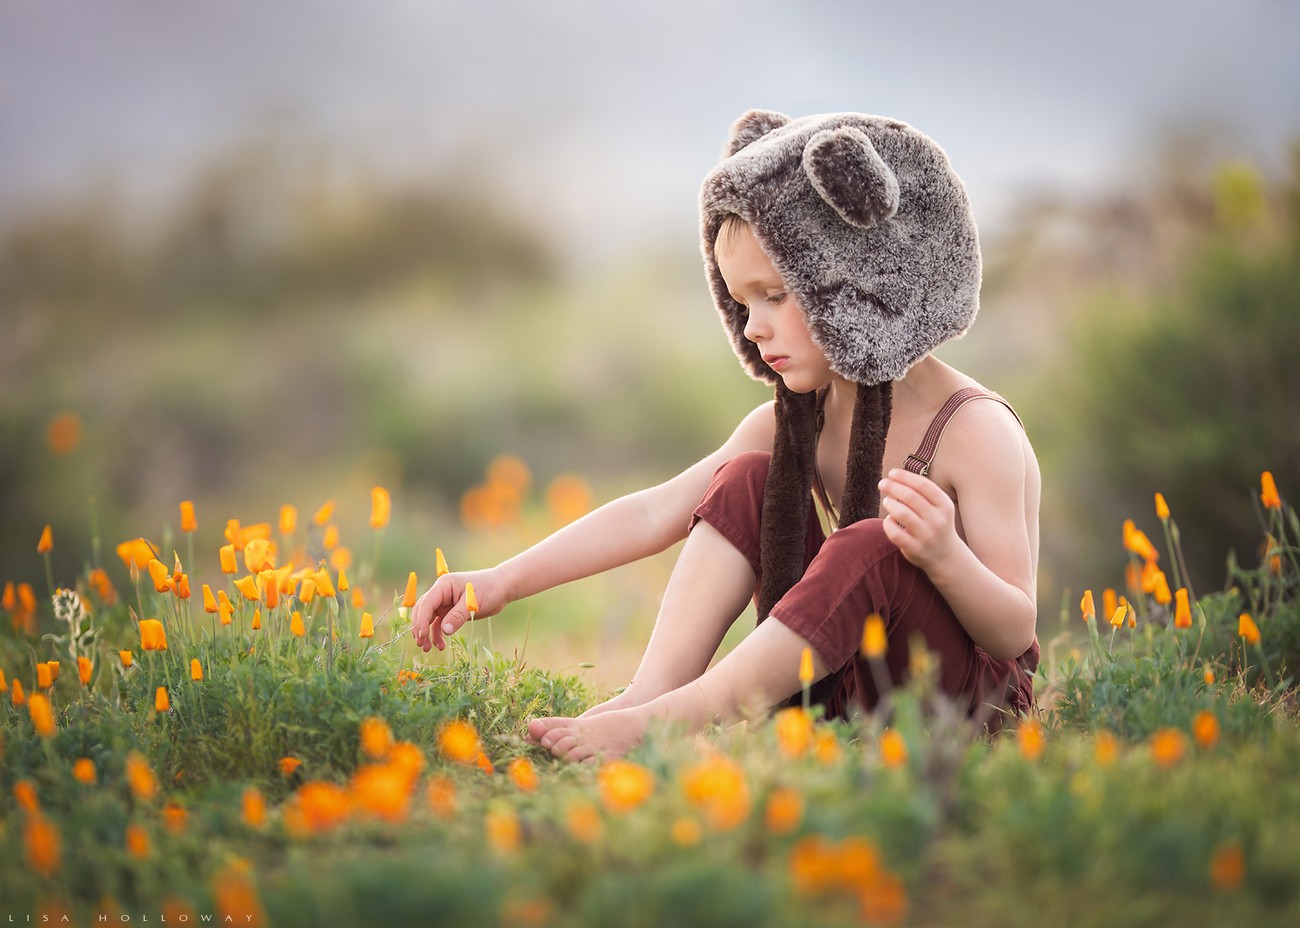 Shooting Dreamy Portraits With Lisa Holloway